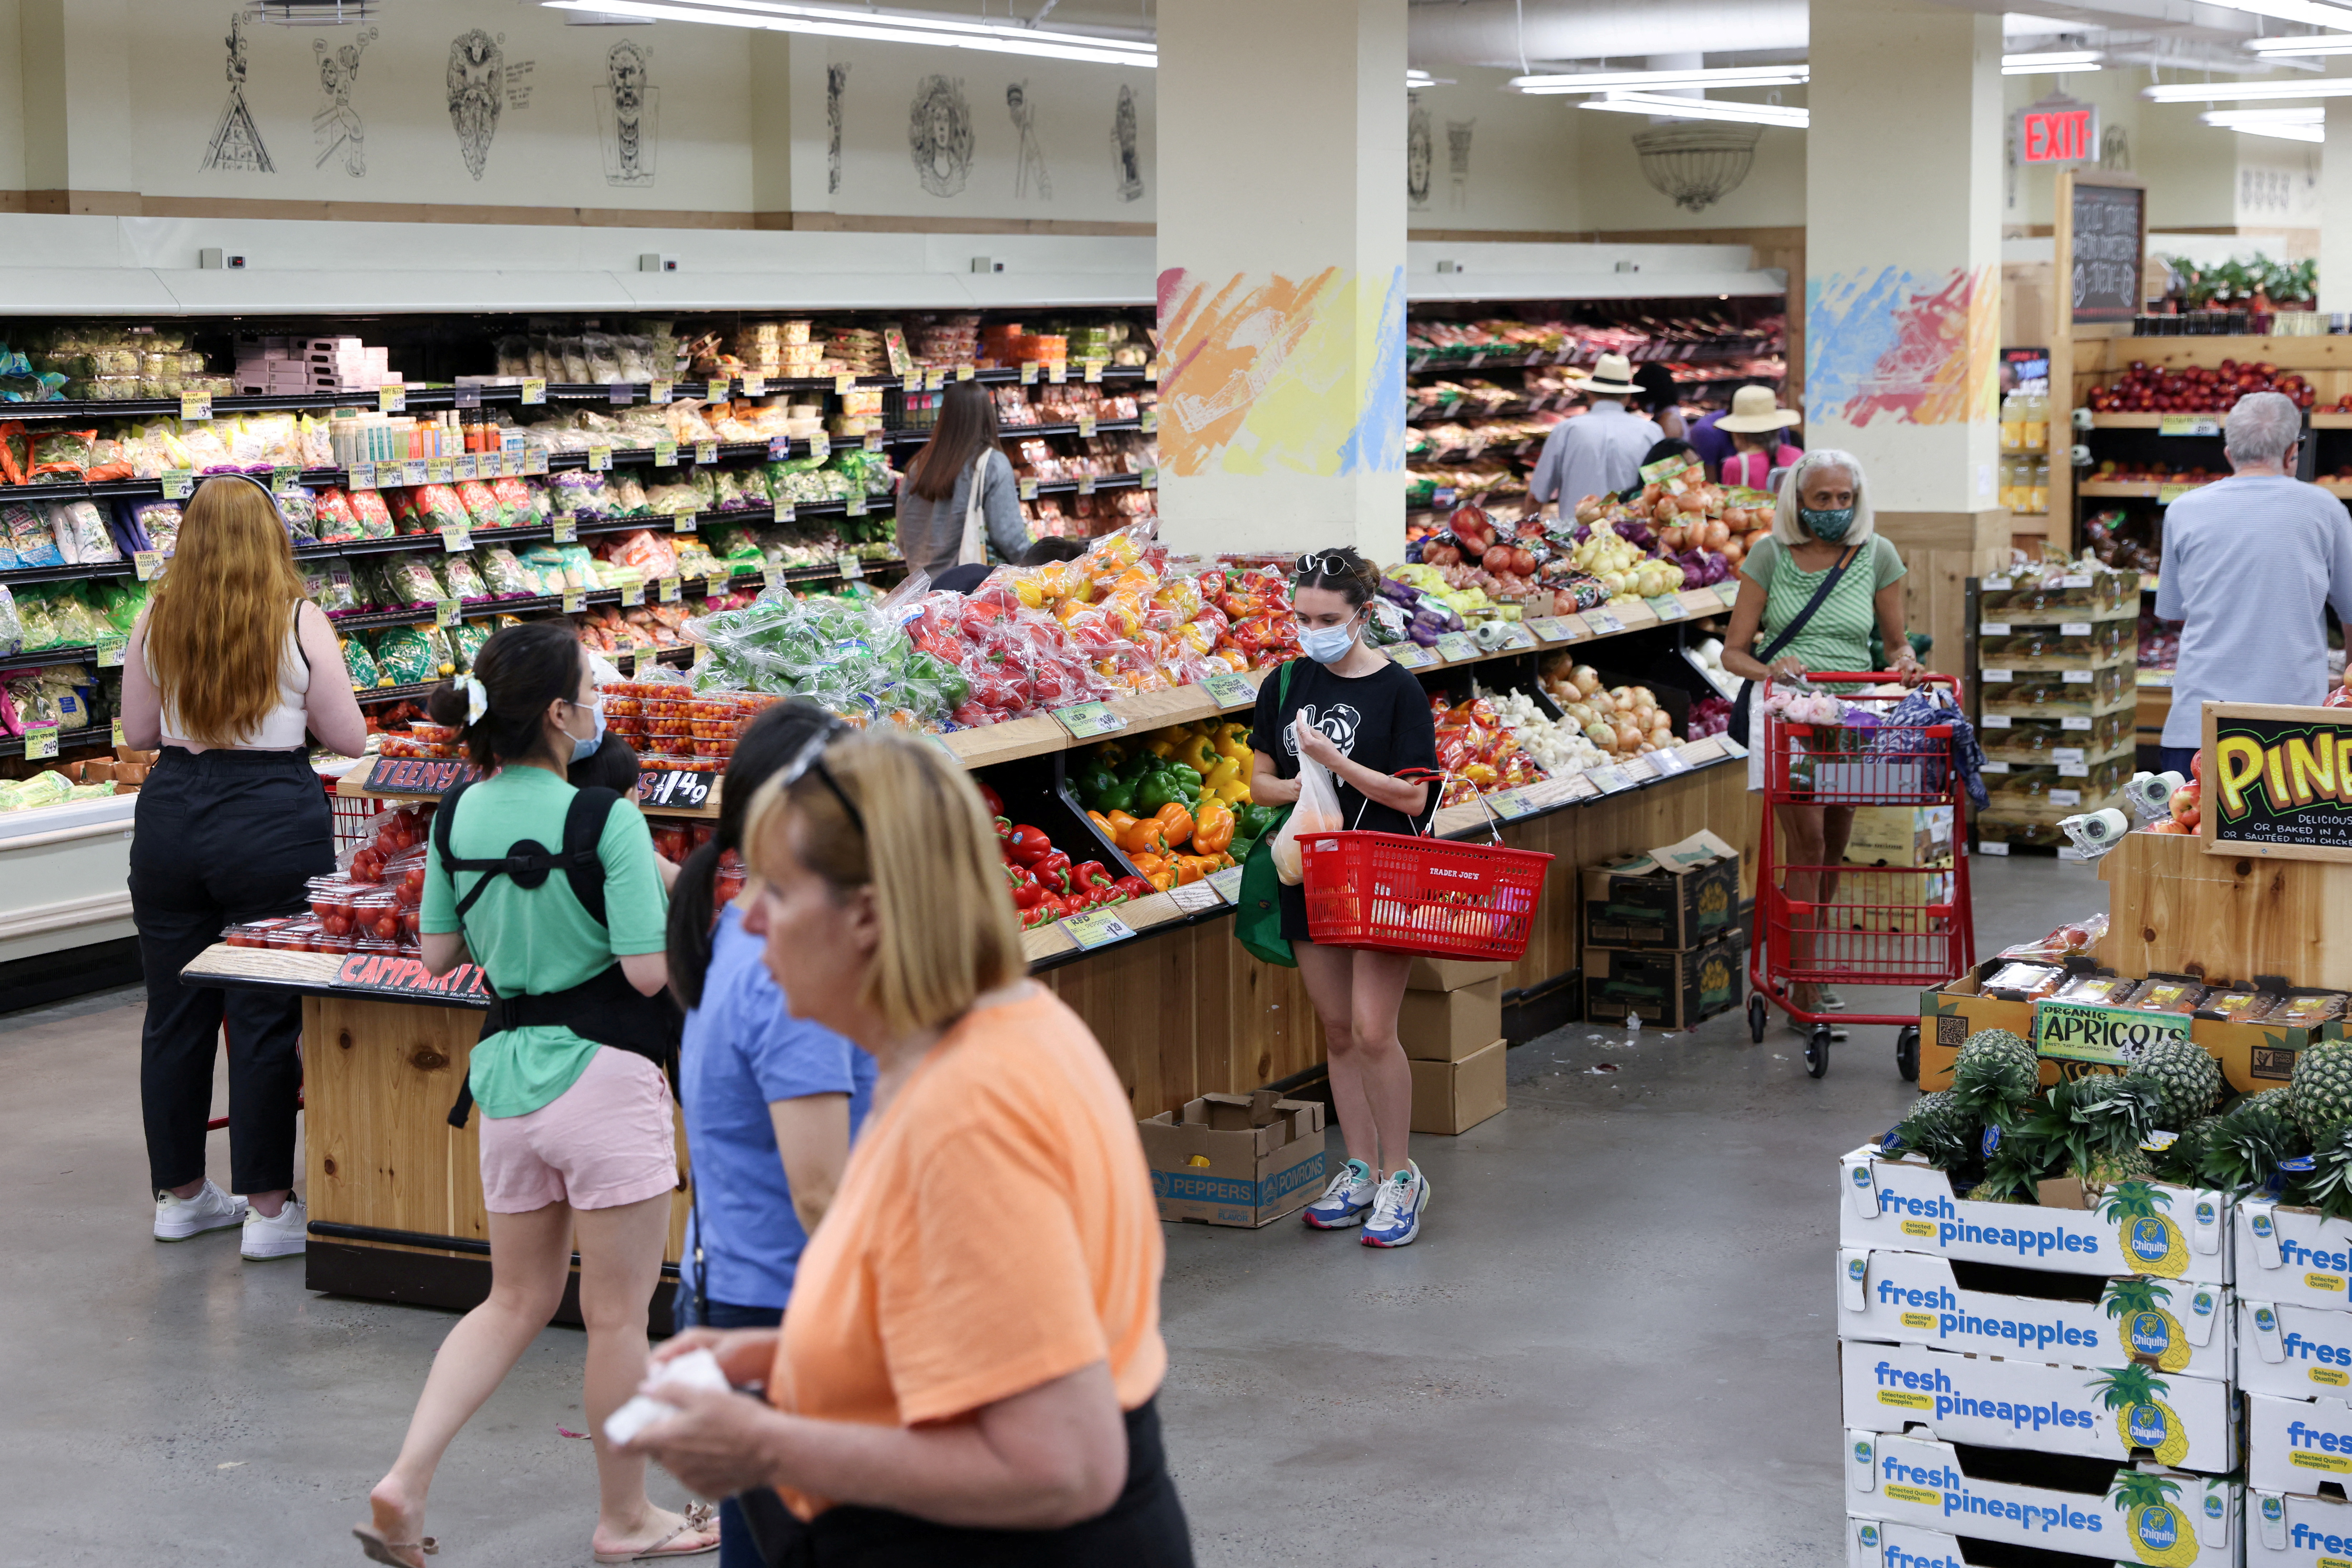 People shop in a supermarket as inflation affected consumer prices in Manhattan, New York City